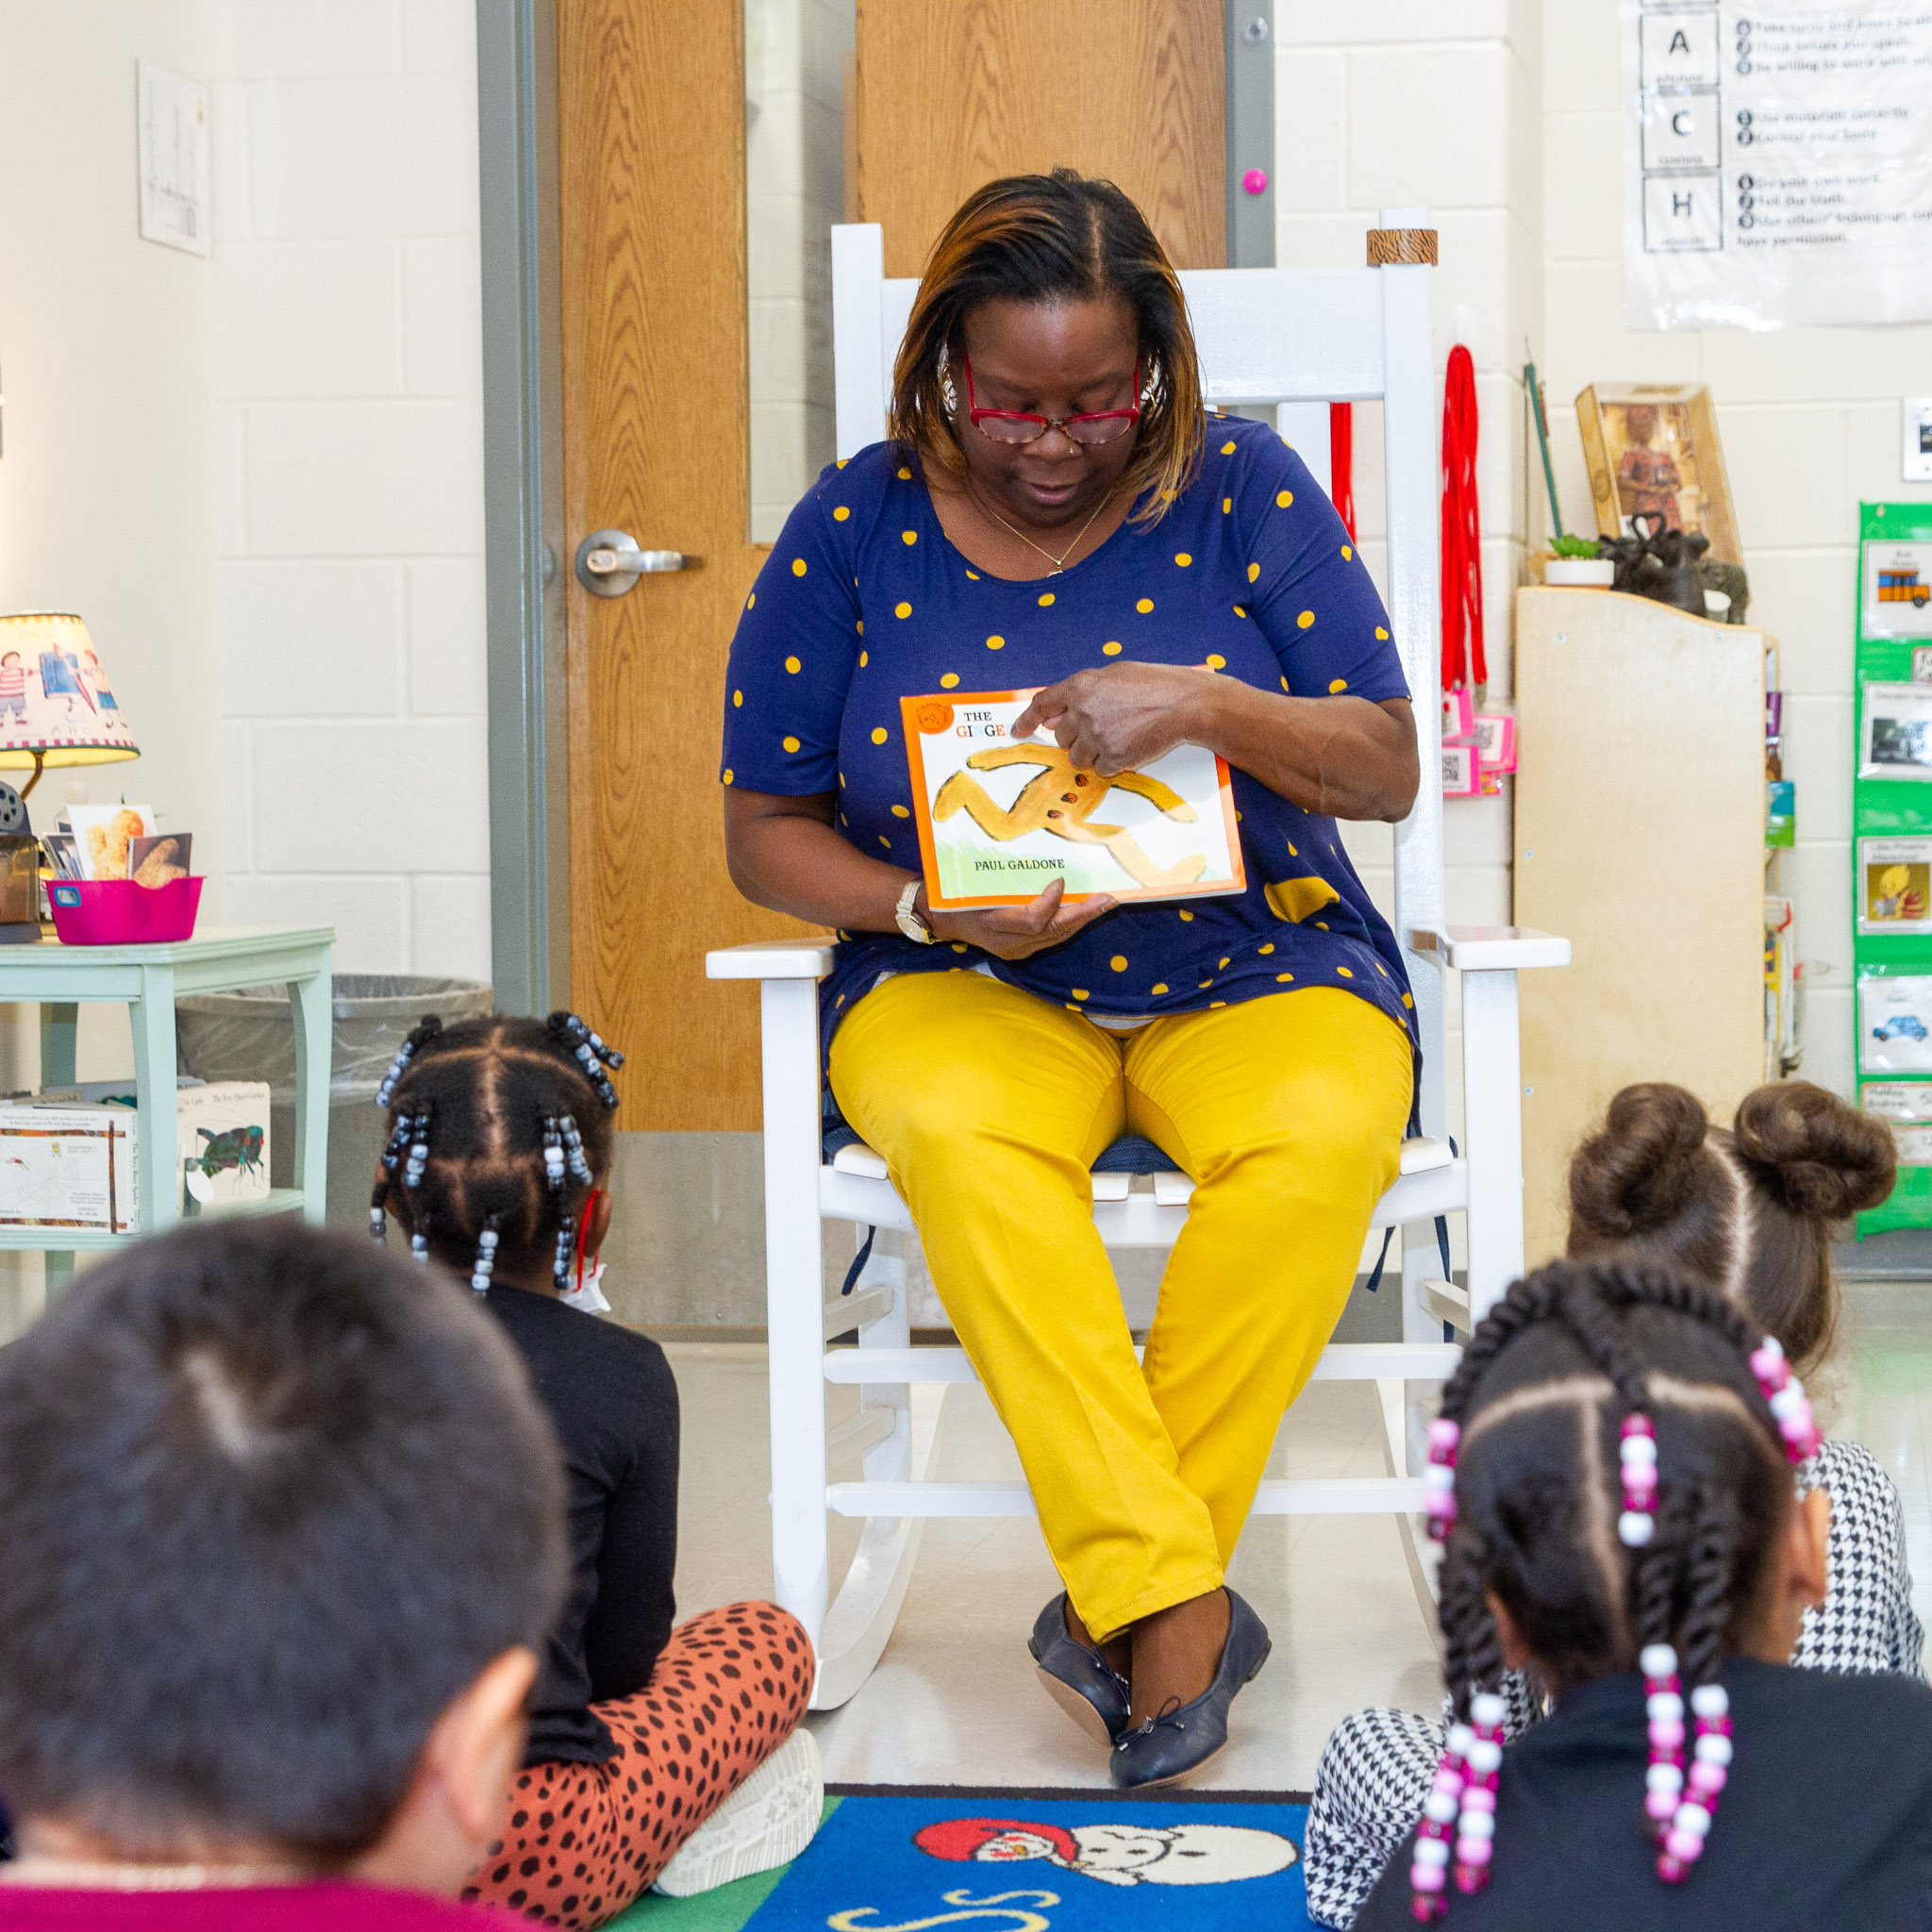 Teacher wearing yellow pants and blue shirt, sitting in a white rocking chair,  points to the cover a children's book with students looking on the carpet